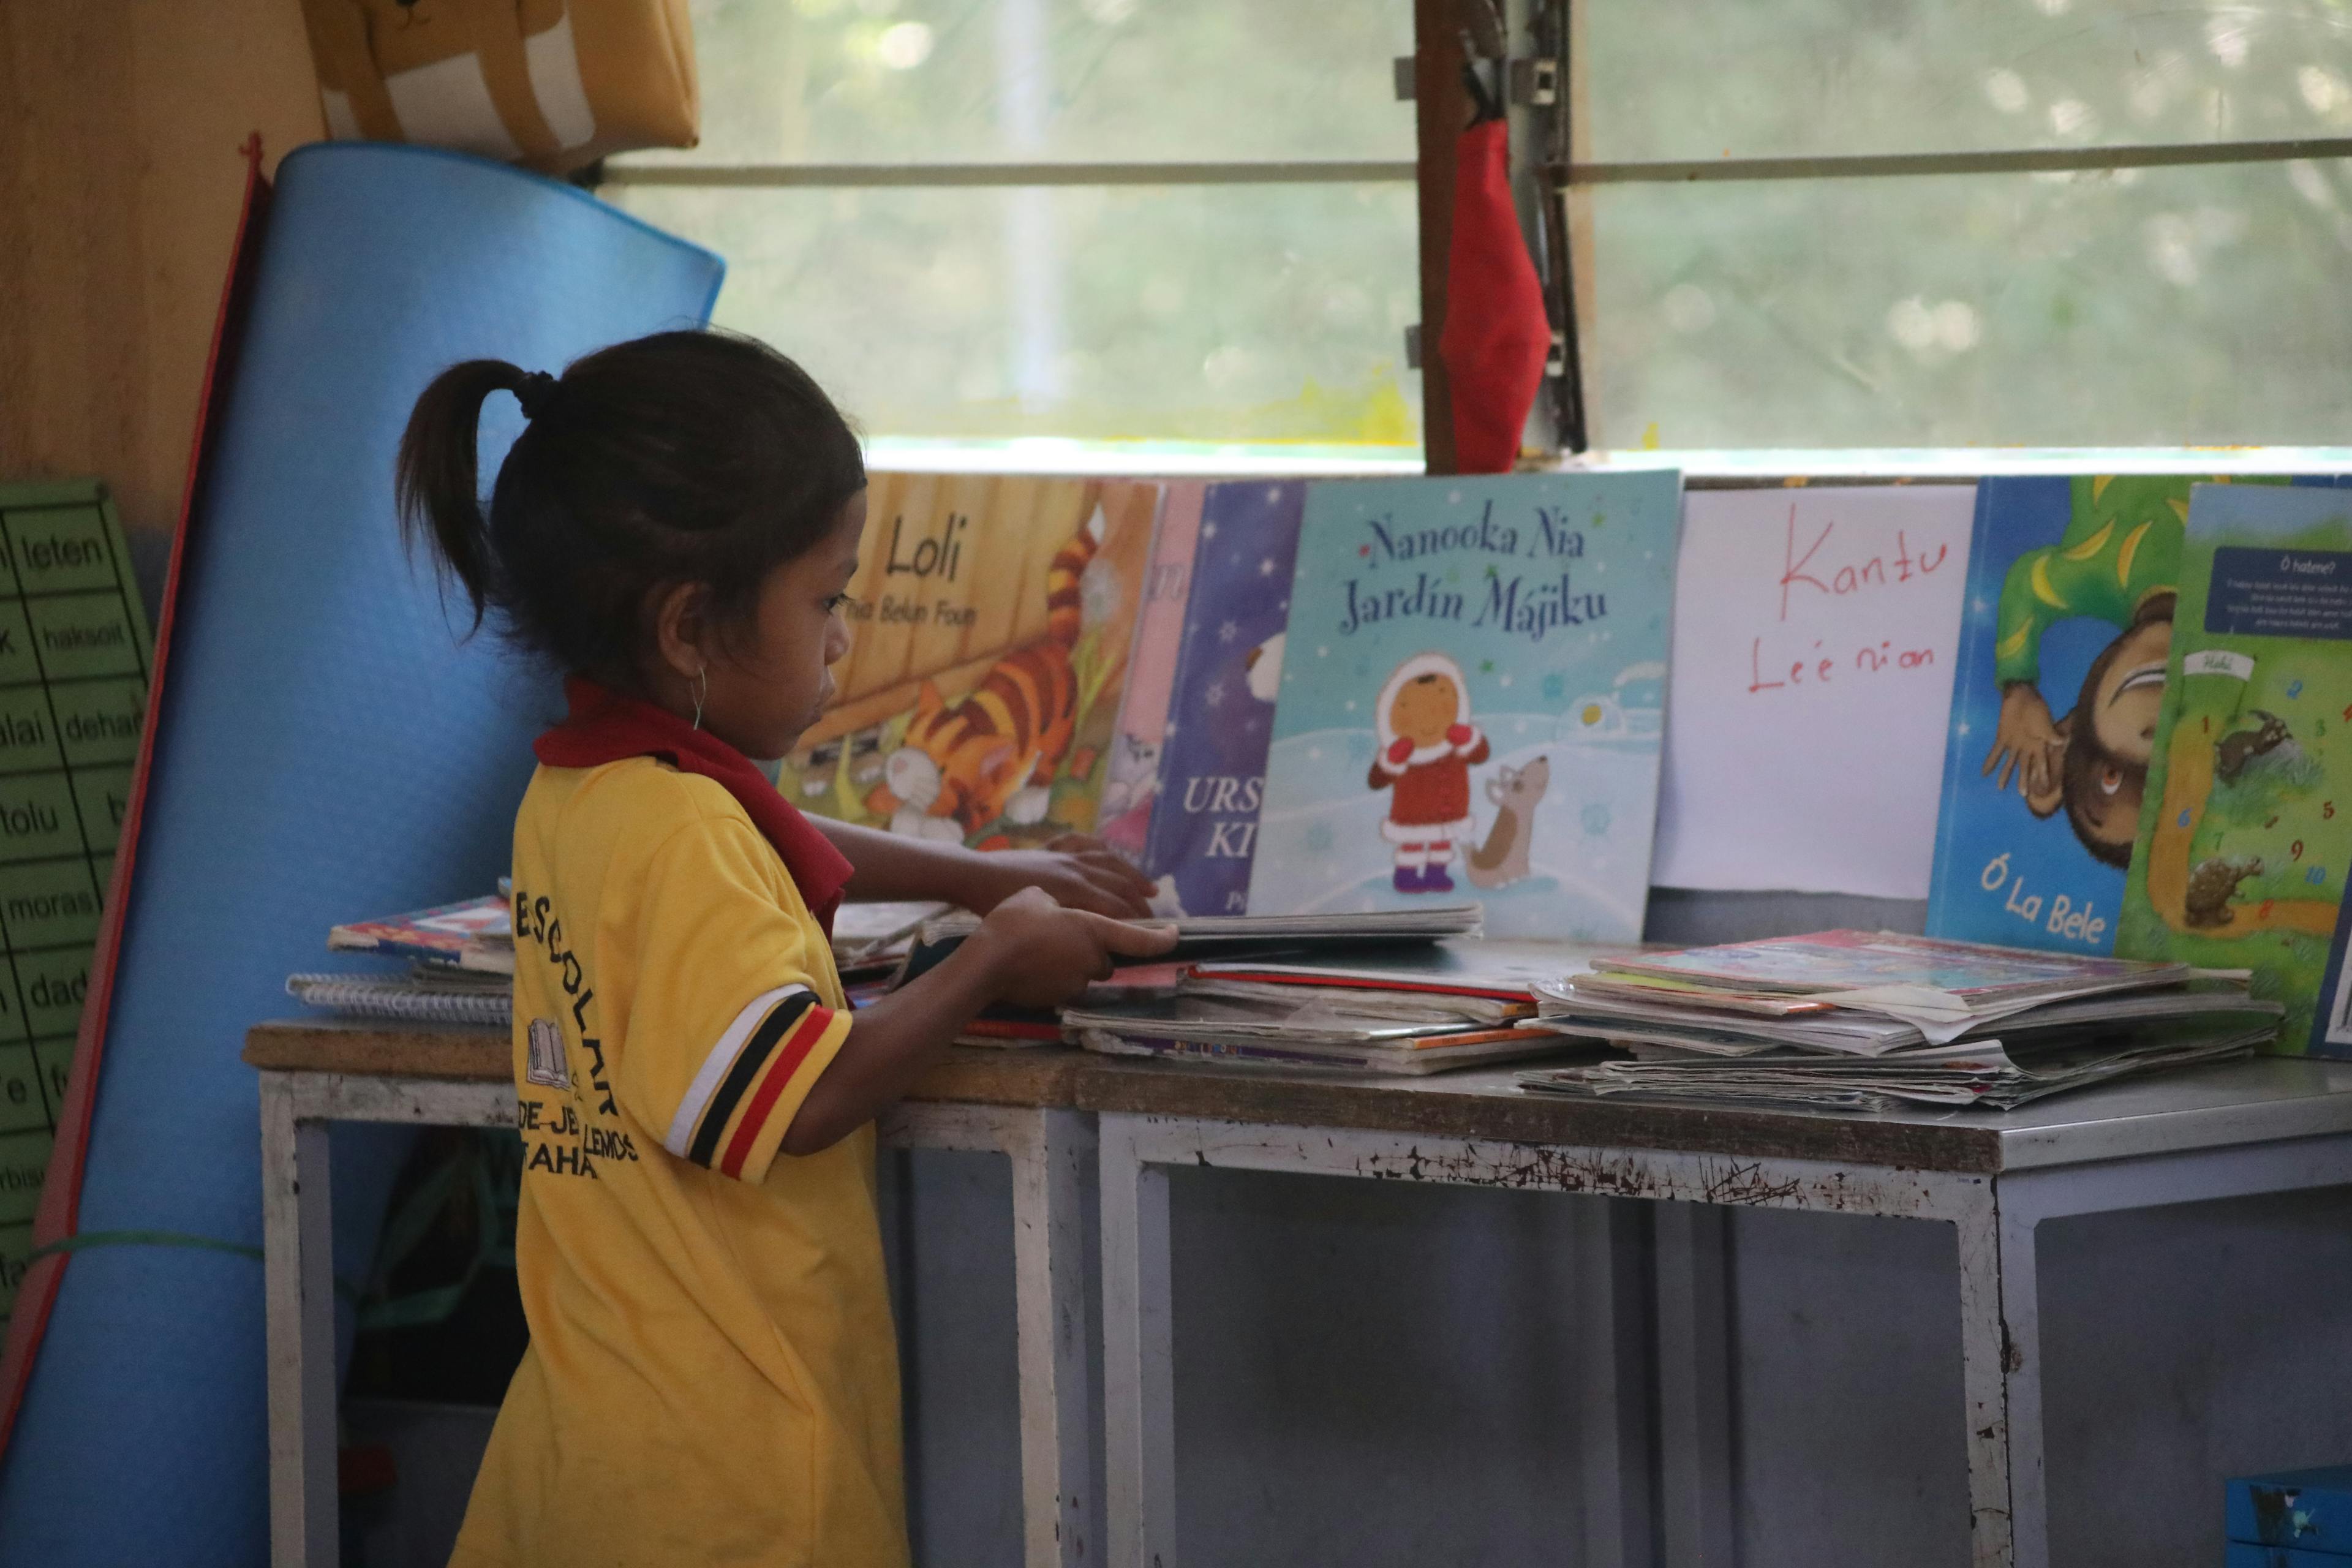 A young girl from Hi Preschool (about 30 minutes outside of Dili) deciding which children's book to read in class. These books, provided by the co-investment funding, are written in the Tetum language and include stories that are culturally relevant for children in Timor-Leste.